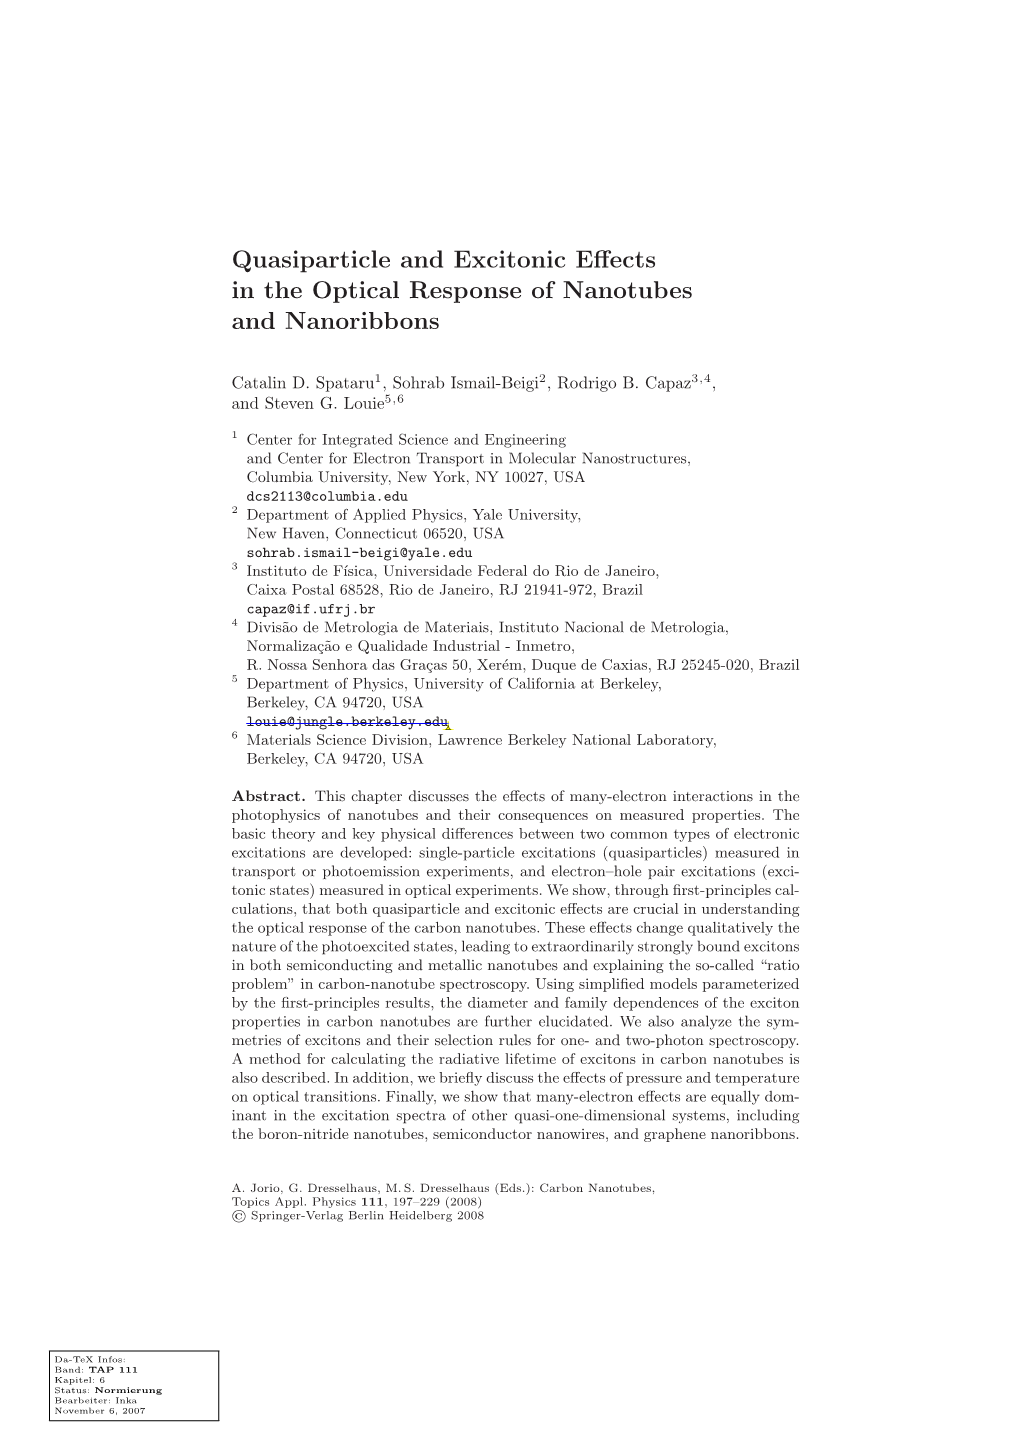 Quasiparticle and Excitonic Effects in the Optical Response of Nanotubes